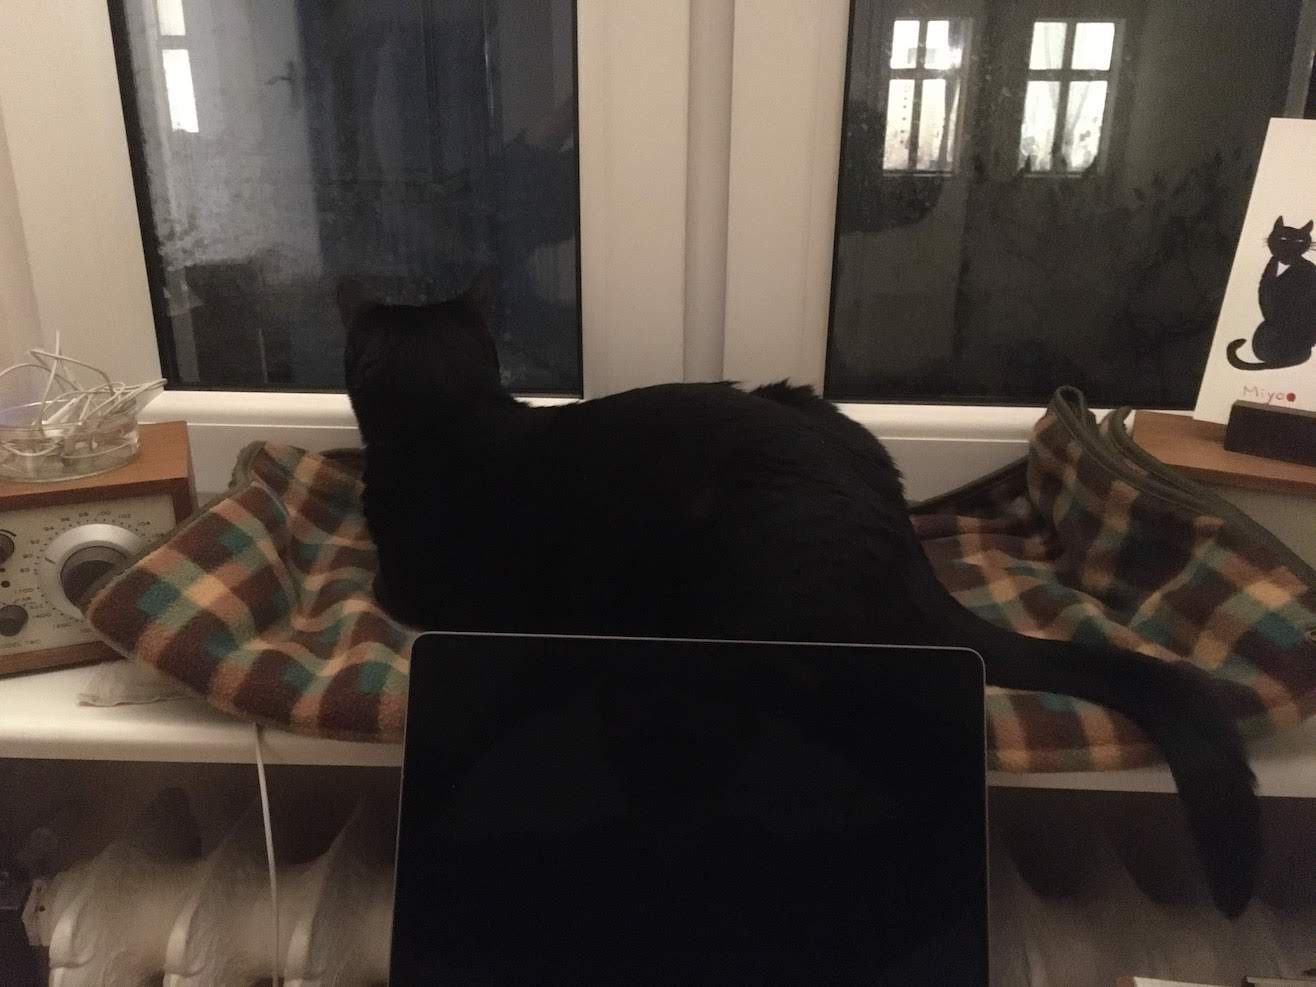 my laptop and black cat